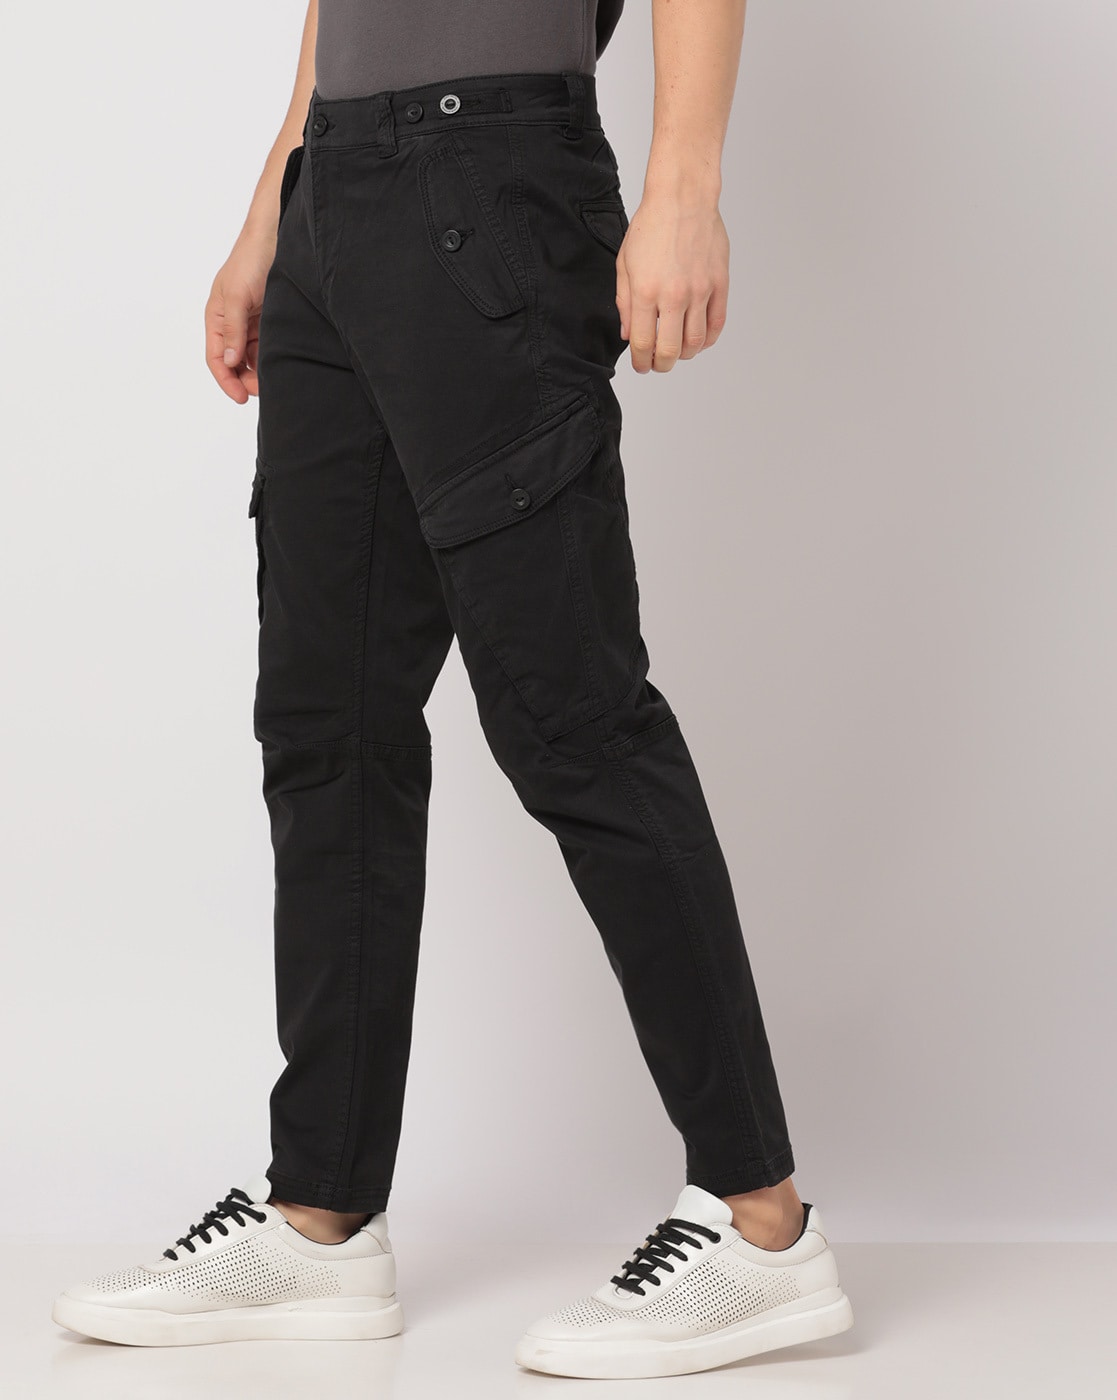 New Look Black Cotton Cuffed Cargo Trousers | very.co.uk